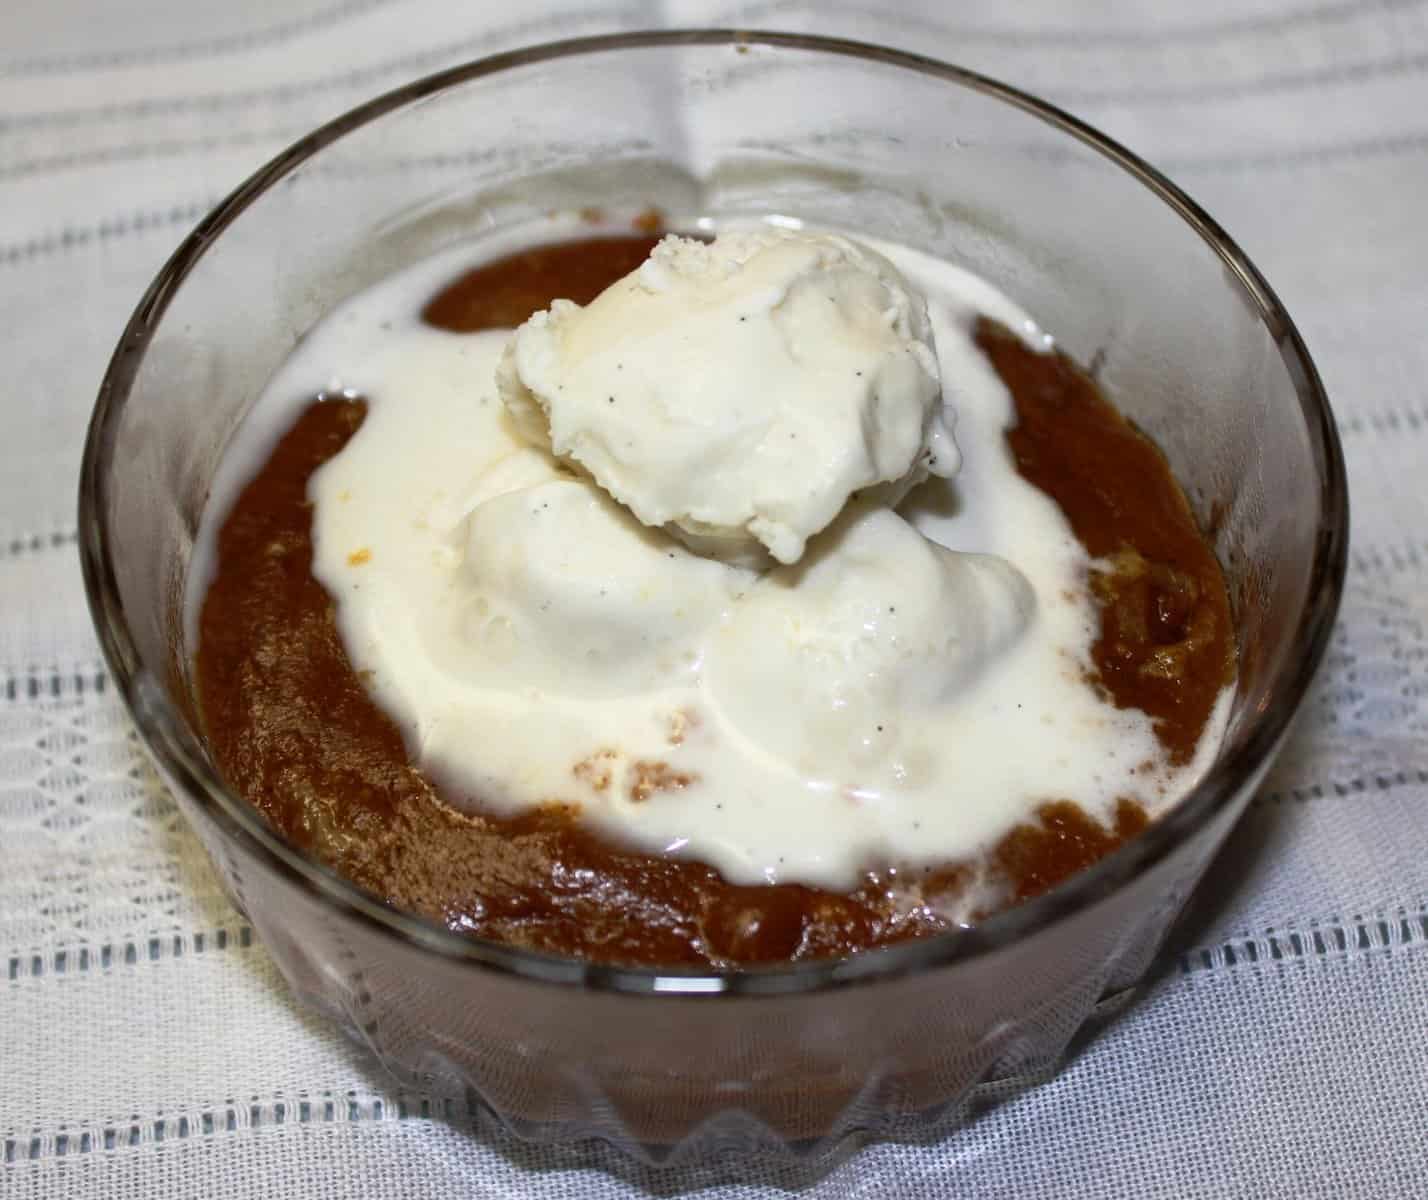 Aunt Carrie’s Famous Indian Pudding Recipe